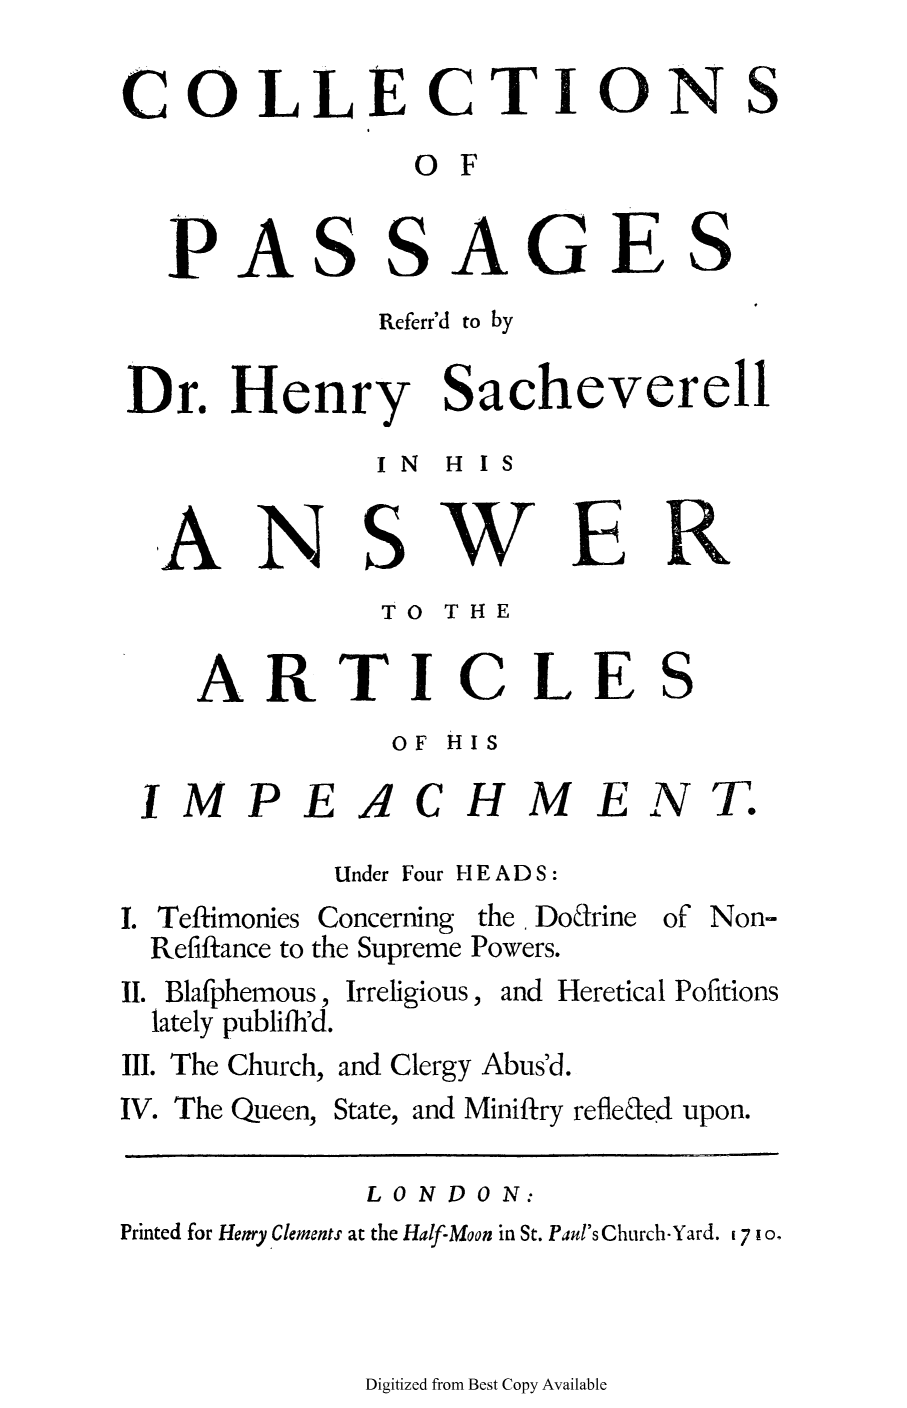 handle is hein.trials/cpasachl0001 and id is 1 raw text is: COLLECTIONS
0 F

P

ASSAGES

Referr'd to by
Dr. Henry Sacheverell
IN  H  IS

N

S

w

B

TO THE

ARTICLE

S

OF HIS

IMPE

'4

CHME

Under Four HEADS:

Teftimonies
Refiftance to

Concerning the Do&rine
the Supreme Powers.

II. Blafphemous,
lately publifh'd.

Irreligious, and Heretical Pofitions

III. The Church, and Clergy Abus'd.

IV. The Queen,

State, and Miniftry refleled upon.

LON DO N:
Printed for Hetry Clements at the Half-Moon in St. Paul's Church-Yard. 7 10.

Digitized from Best Copy Available

A

N

T

of Non-

R


